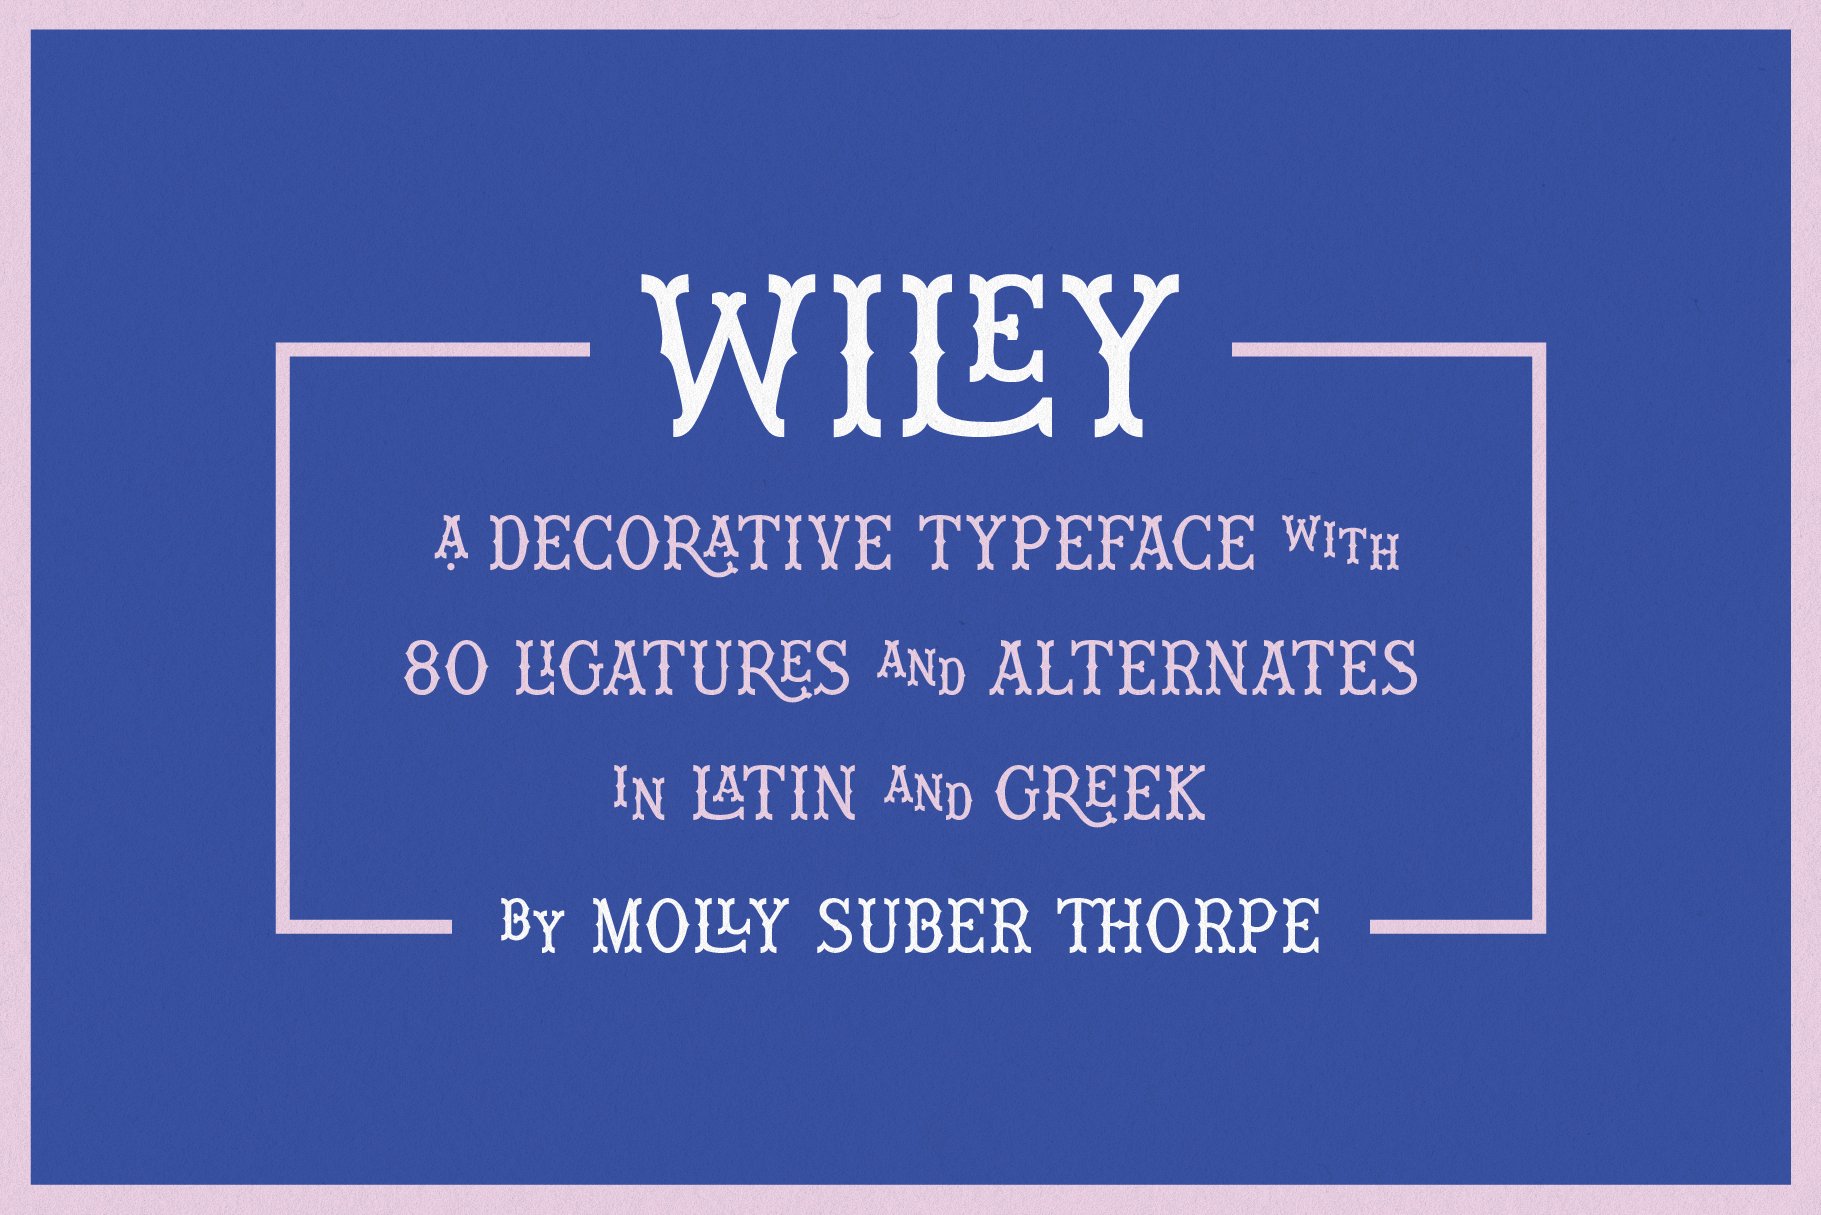 wiley font molly suber thorpe 03 364